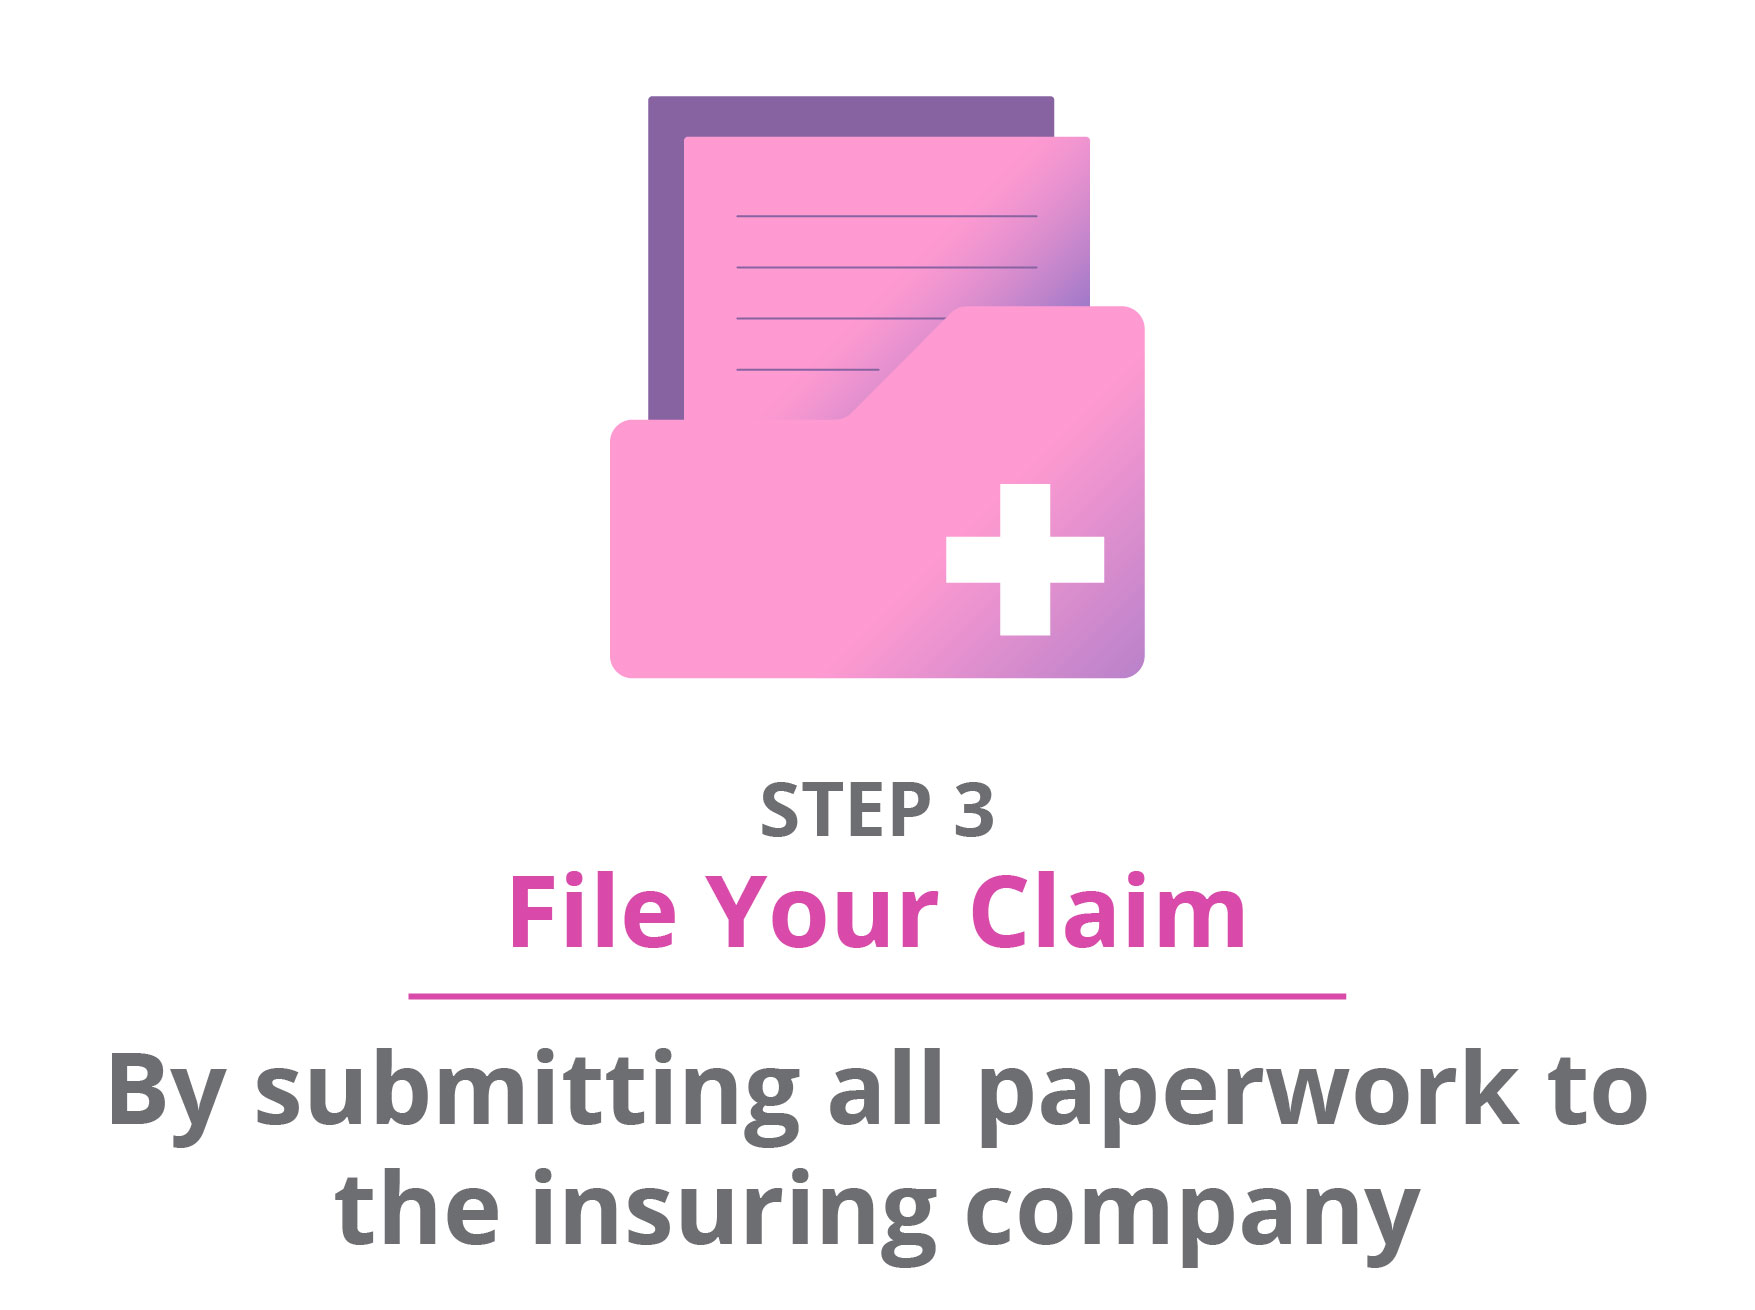 File Your Claim